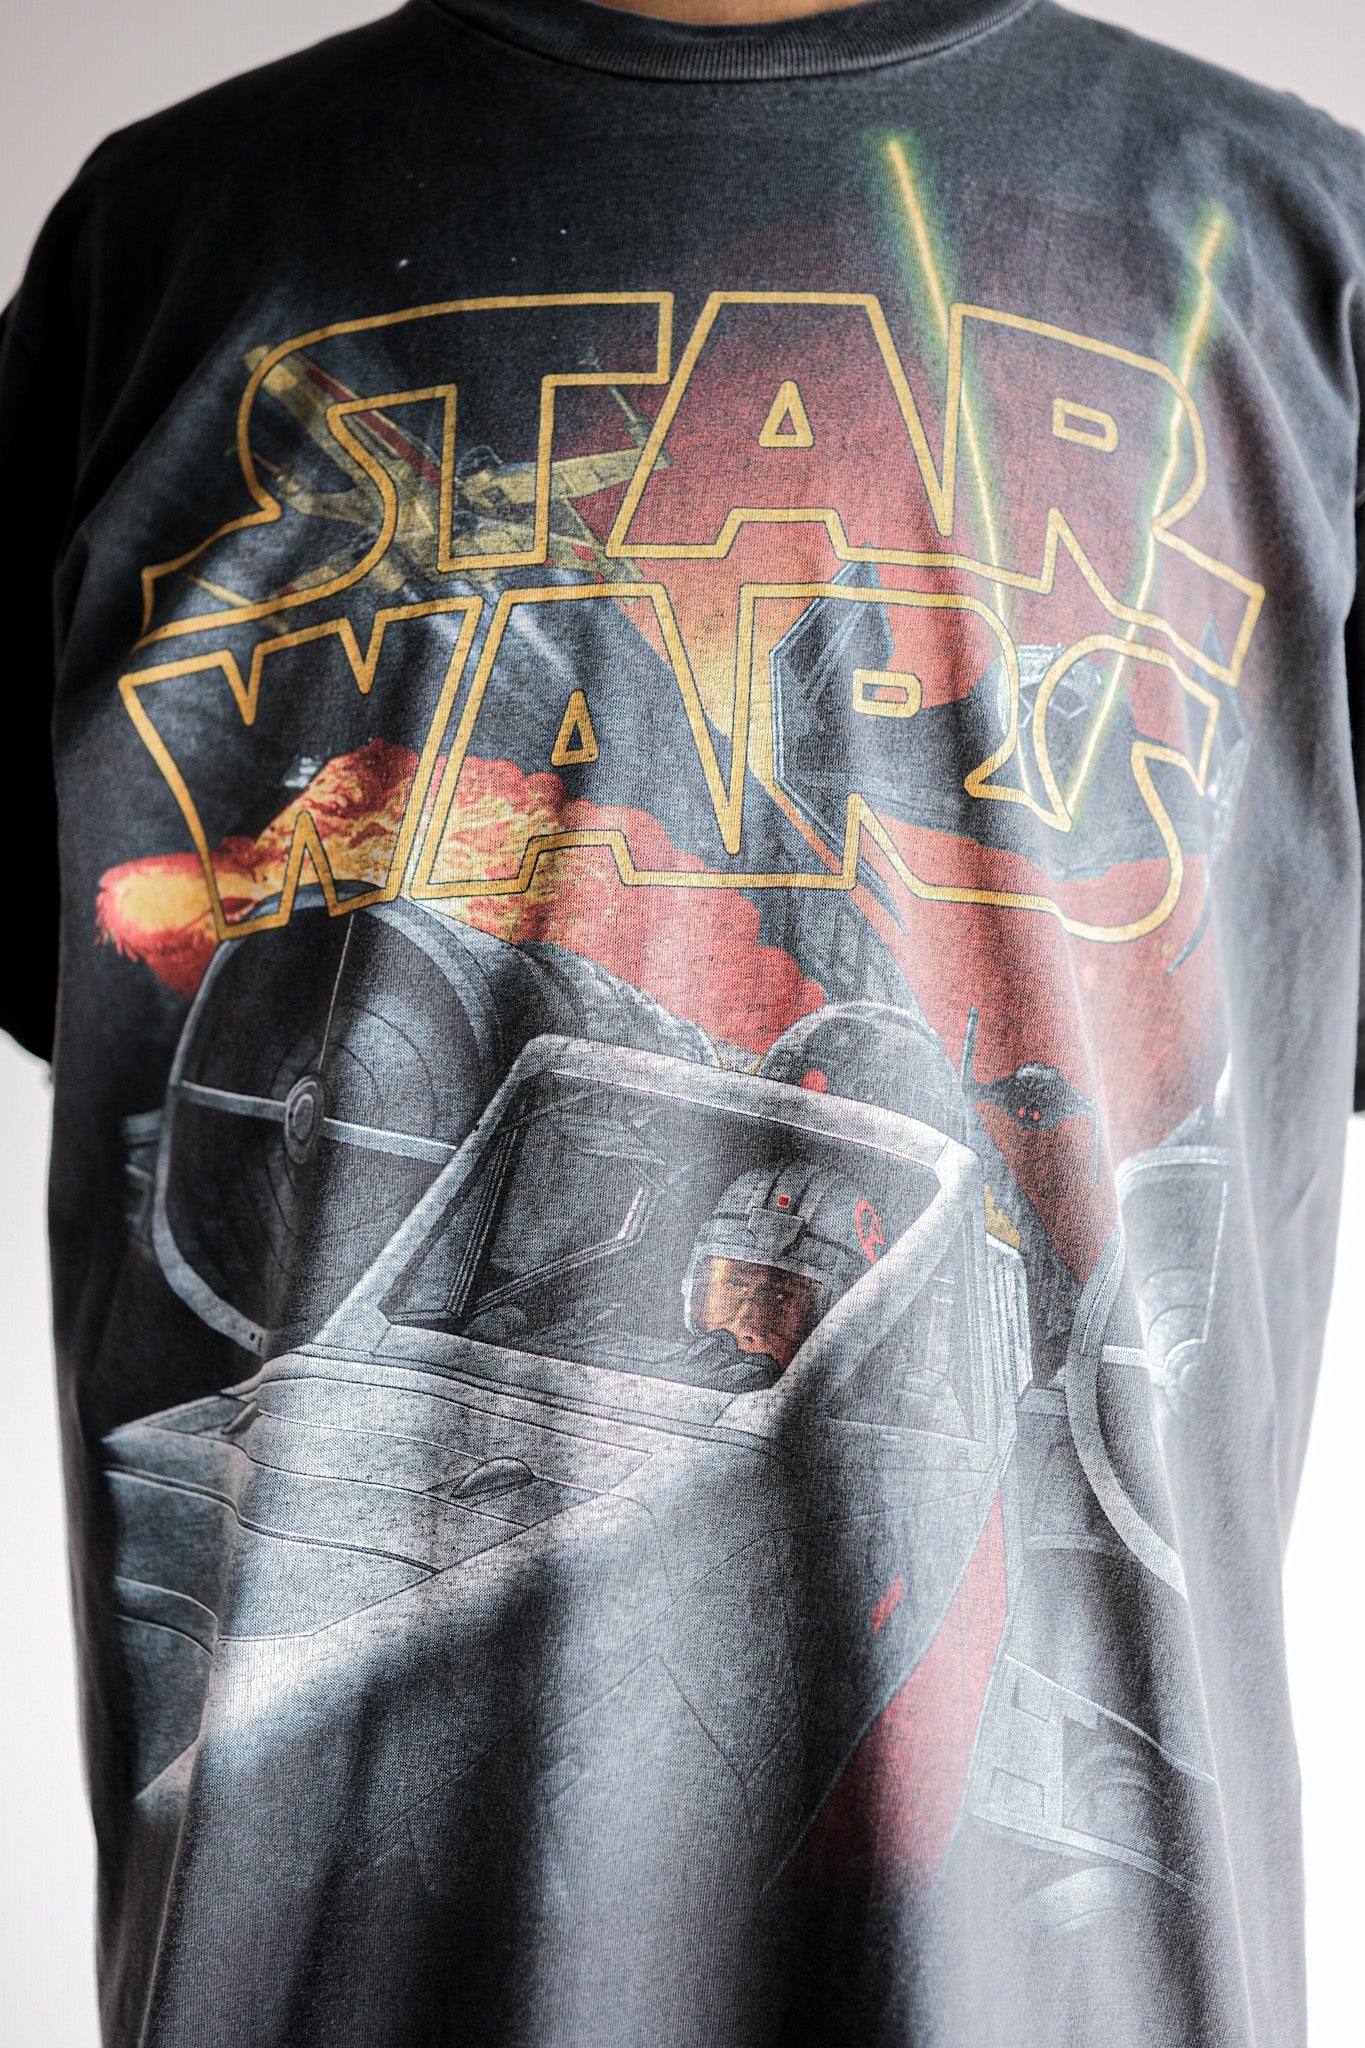 [~ 90's] Vintage Movie Print T-shirt size.l ​​"Star Wars" "Made in U.S.A."